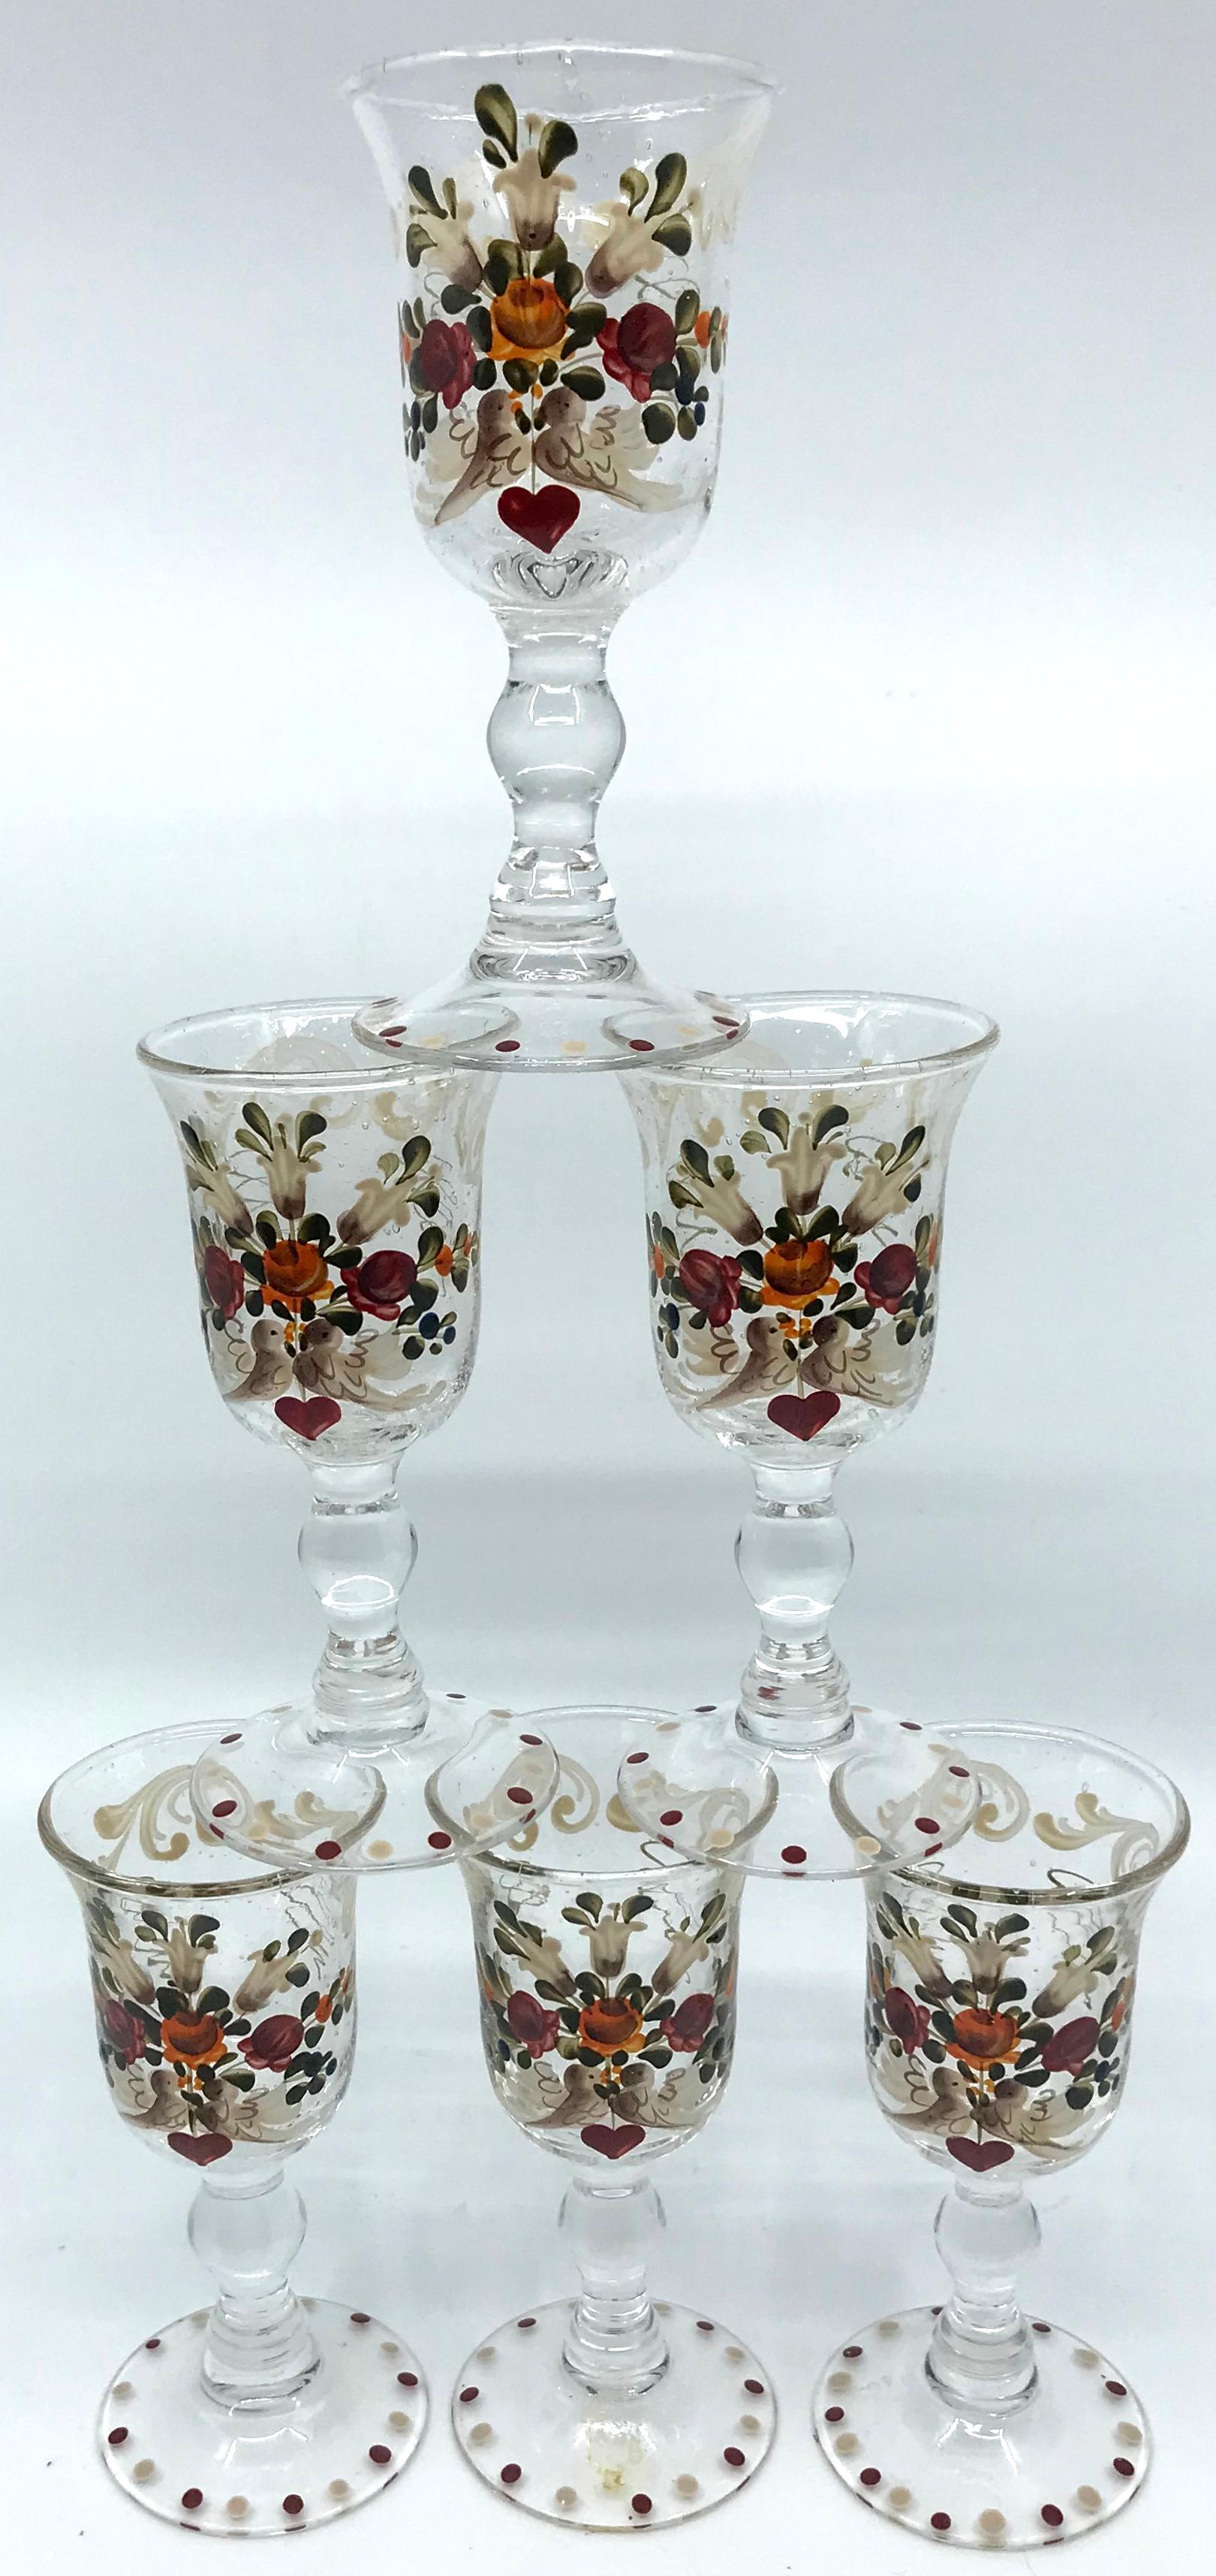 Set of six French painted glasses. Antique set of clear glass baluster form glasses with hand paint and enameled design with floral spray of lilies centered with a pair of kissing doves joined by one heart with further floral sprays and scrolls